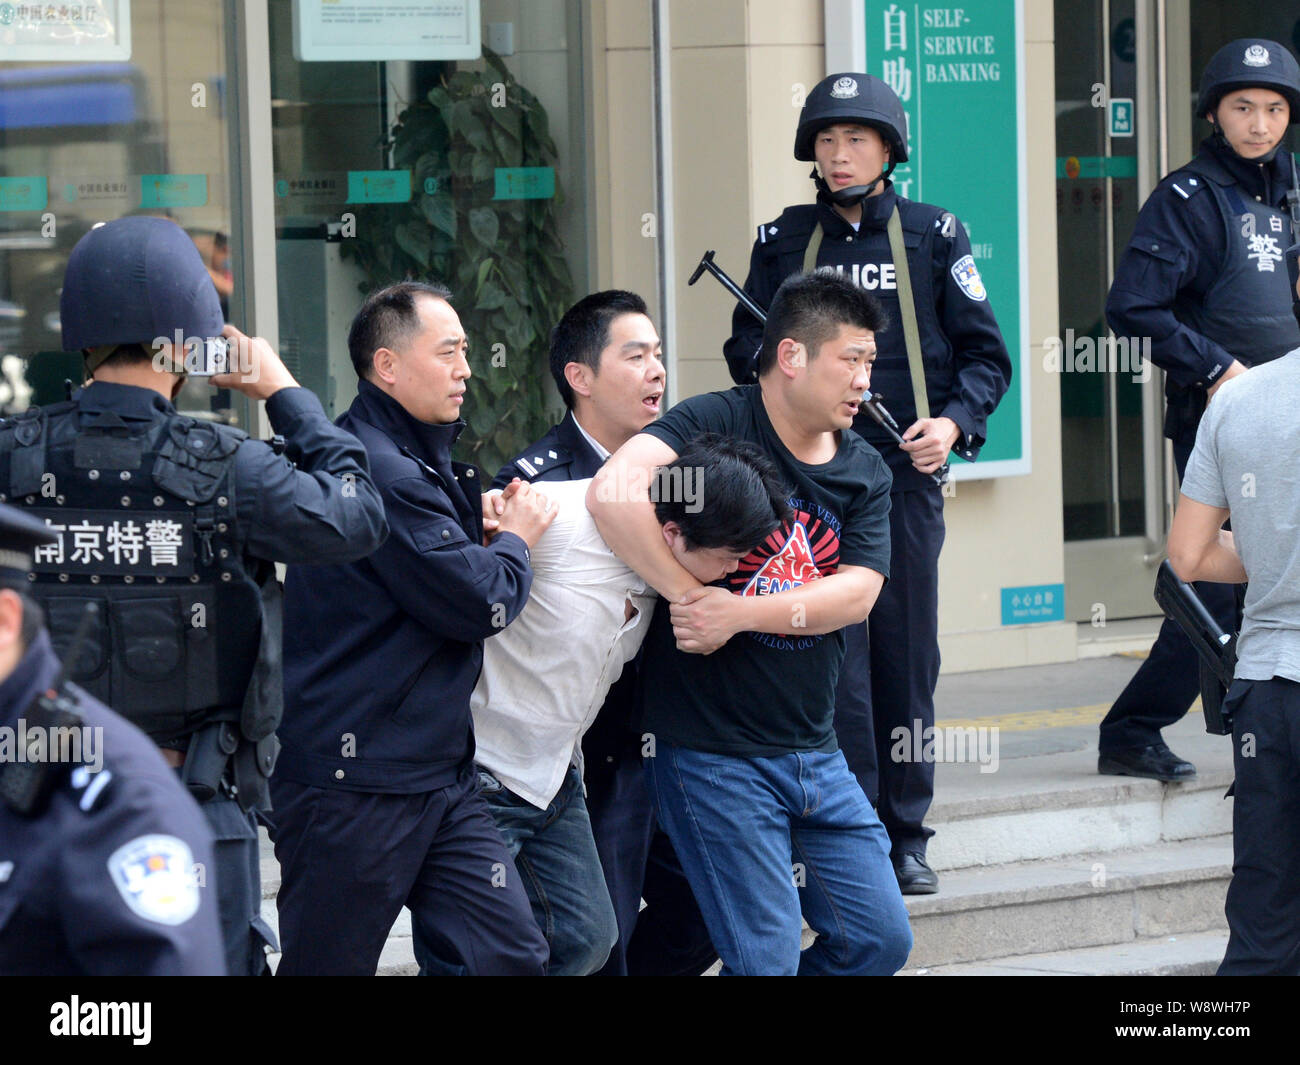 Chinese Police Officers Arrest A Knife Wielding Man Center In White Who Took A Hostage In